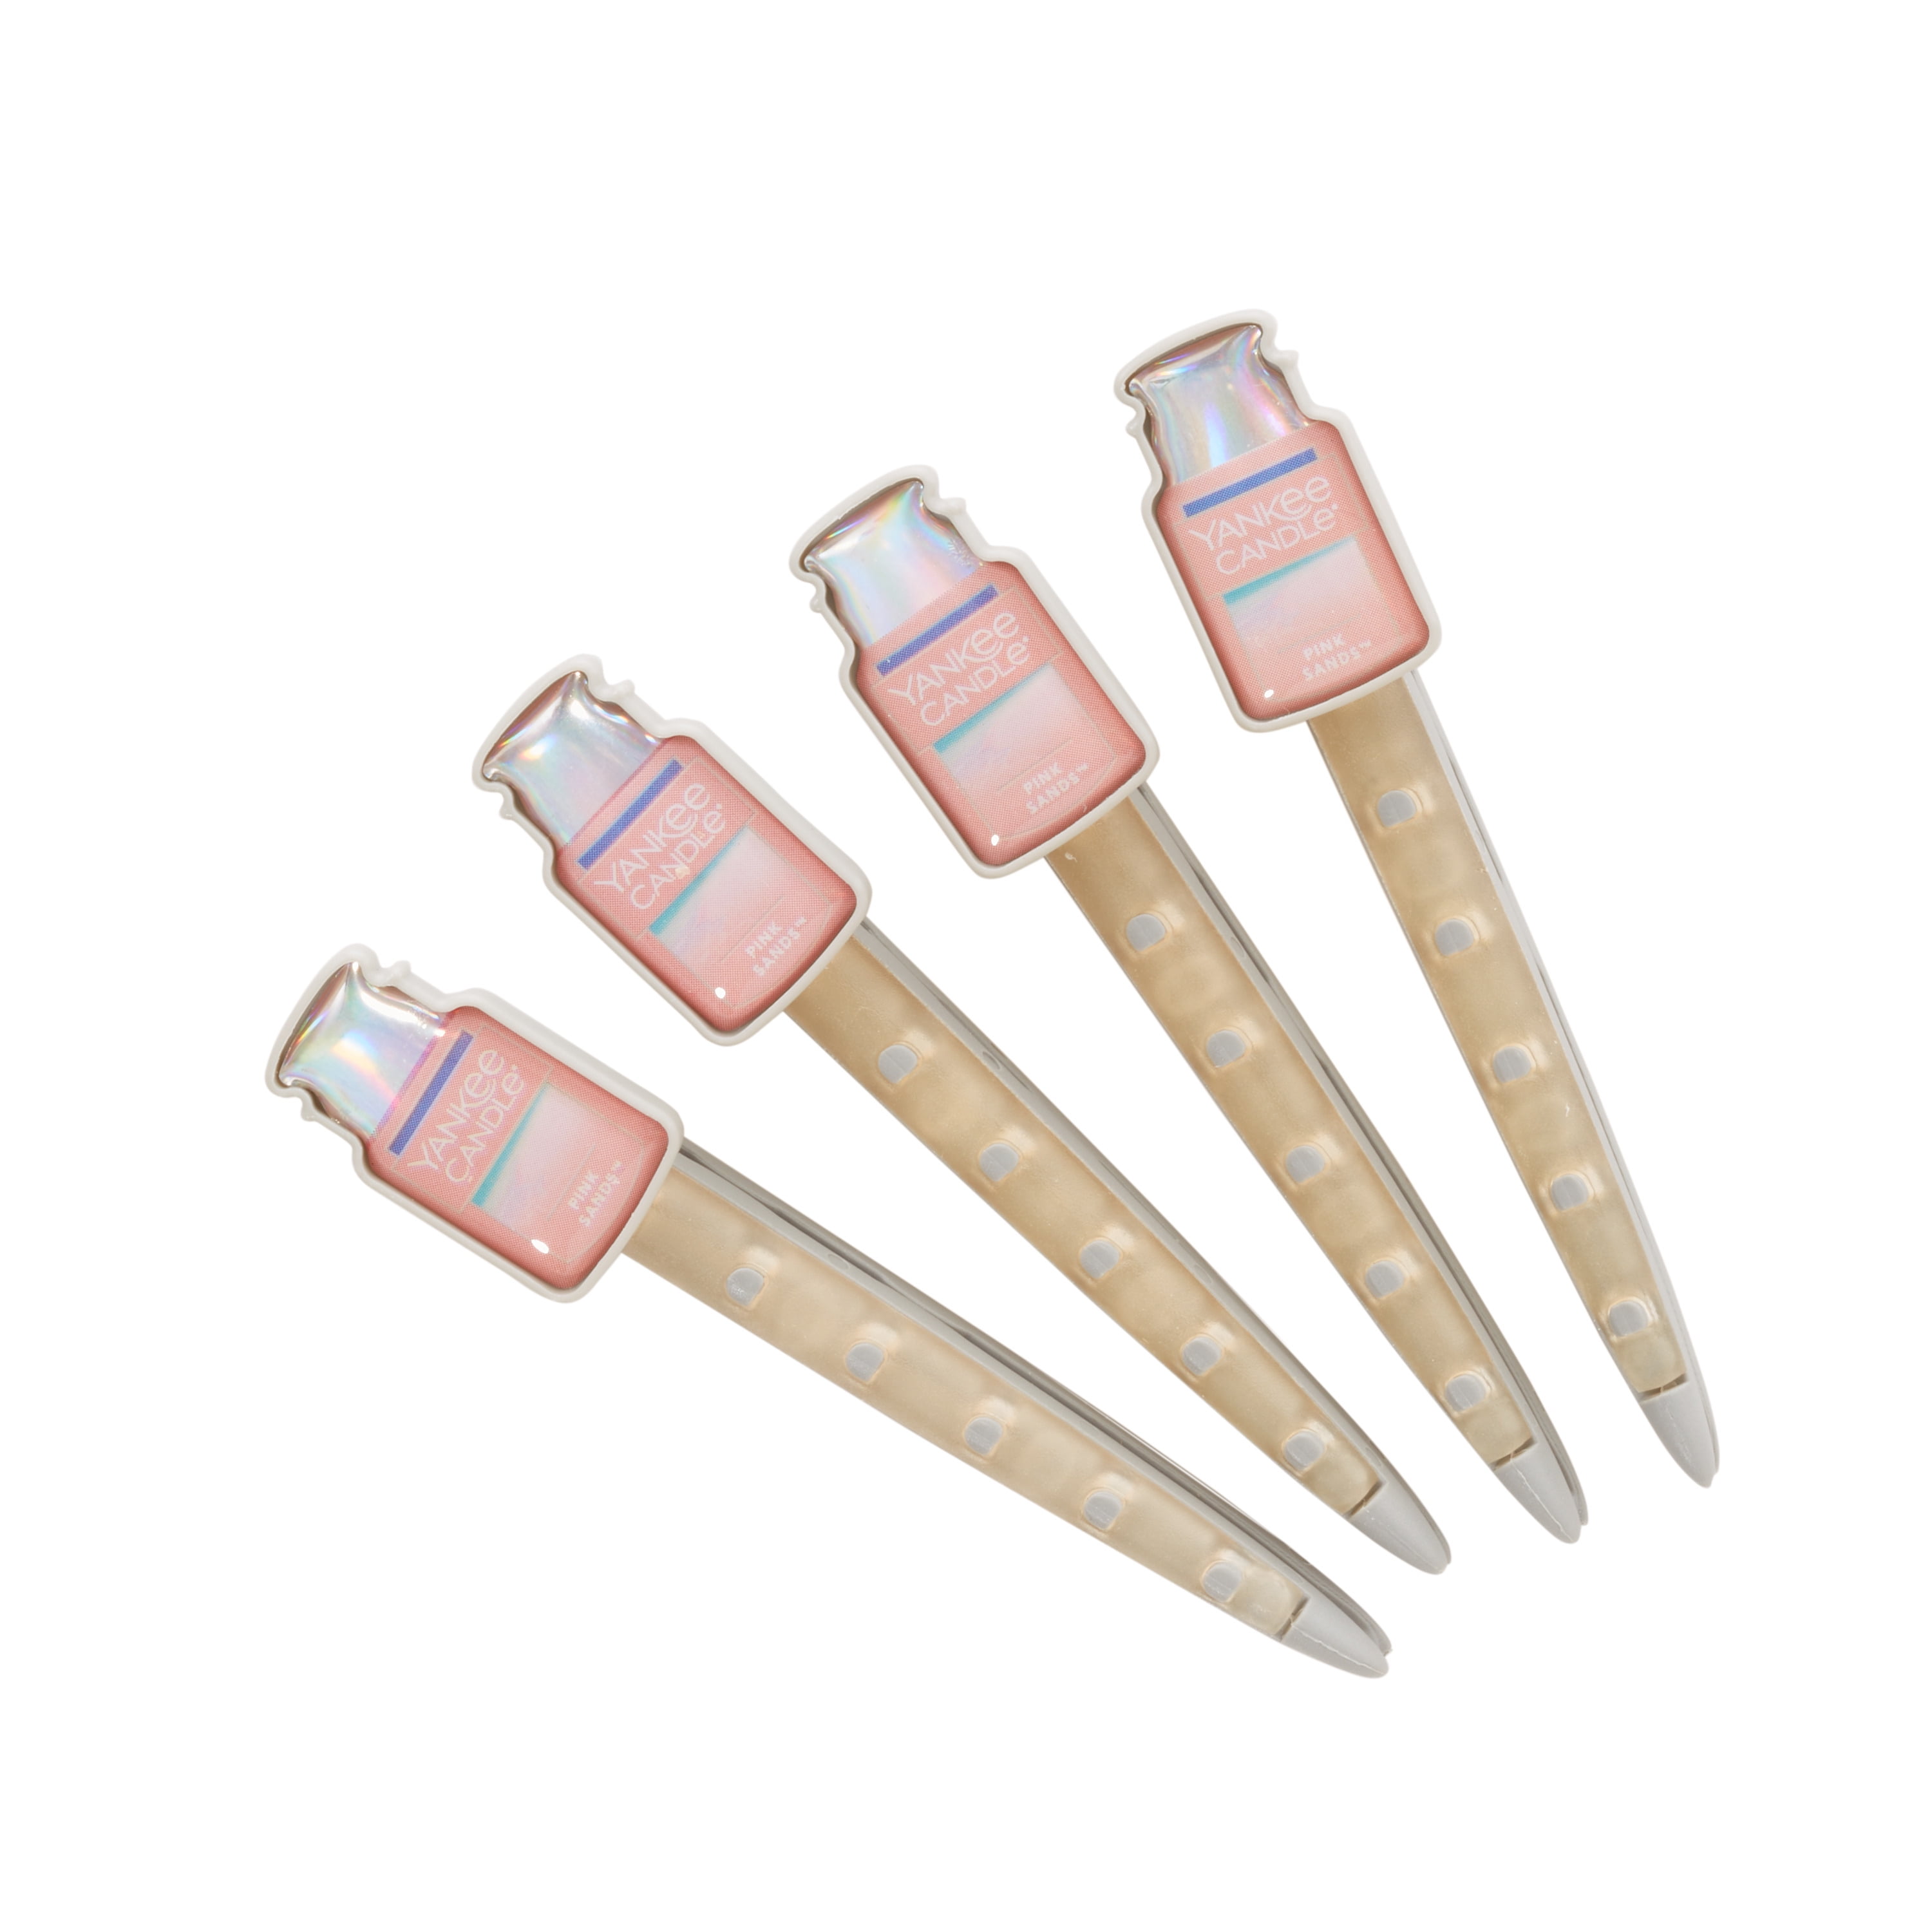 Yankee Candle 5038580059939 car Vent Stick Pink Sands op-4 szt. YCVSPS, 4  Count (Pack of 1)